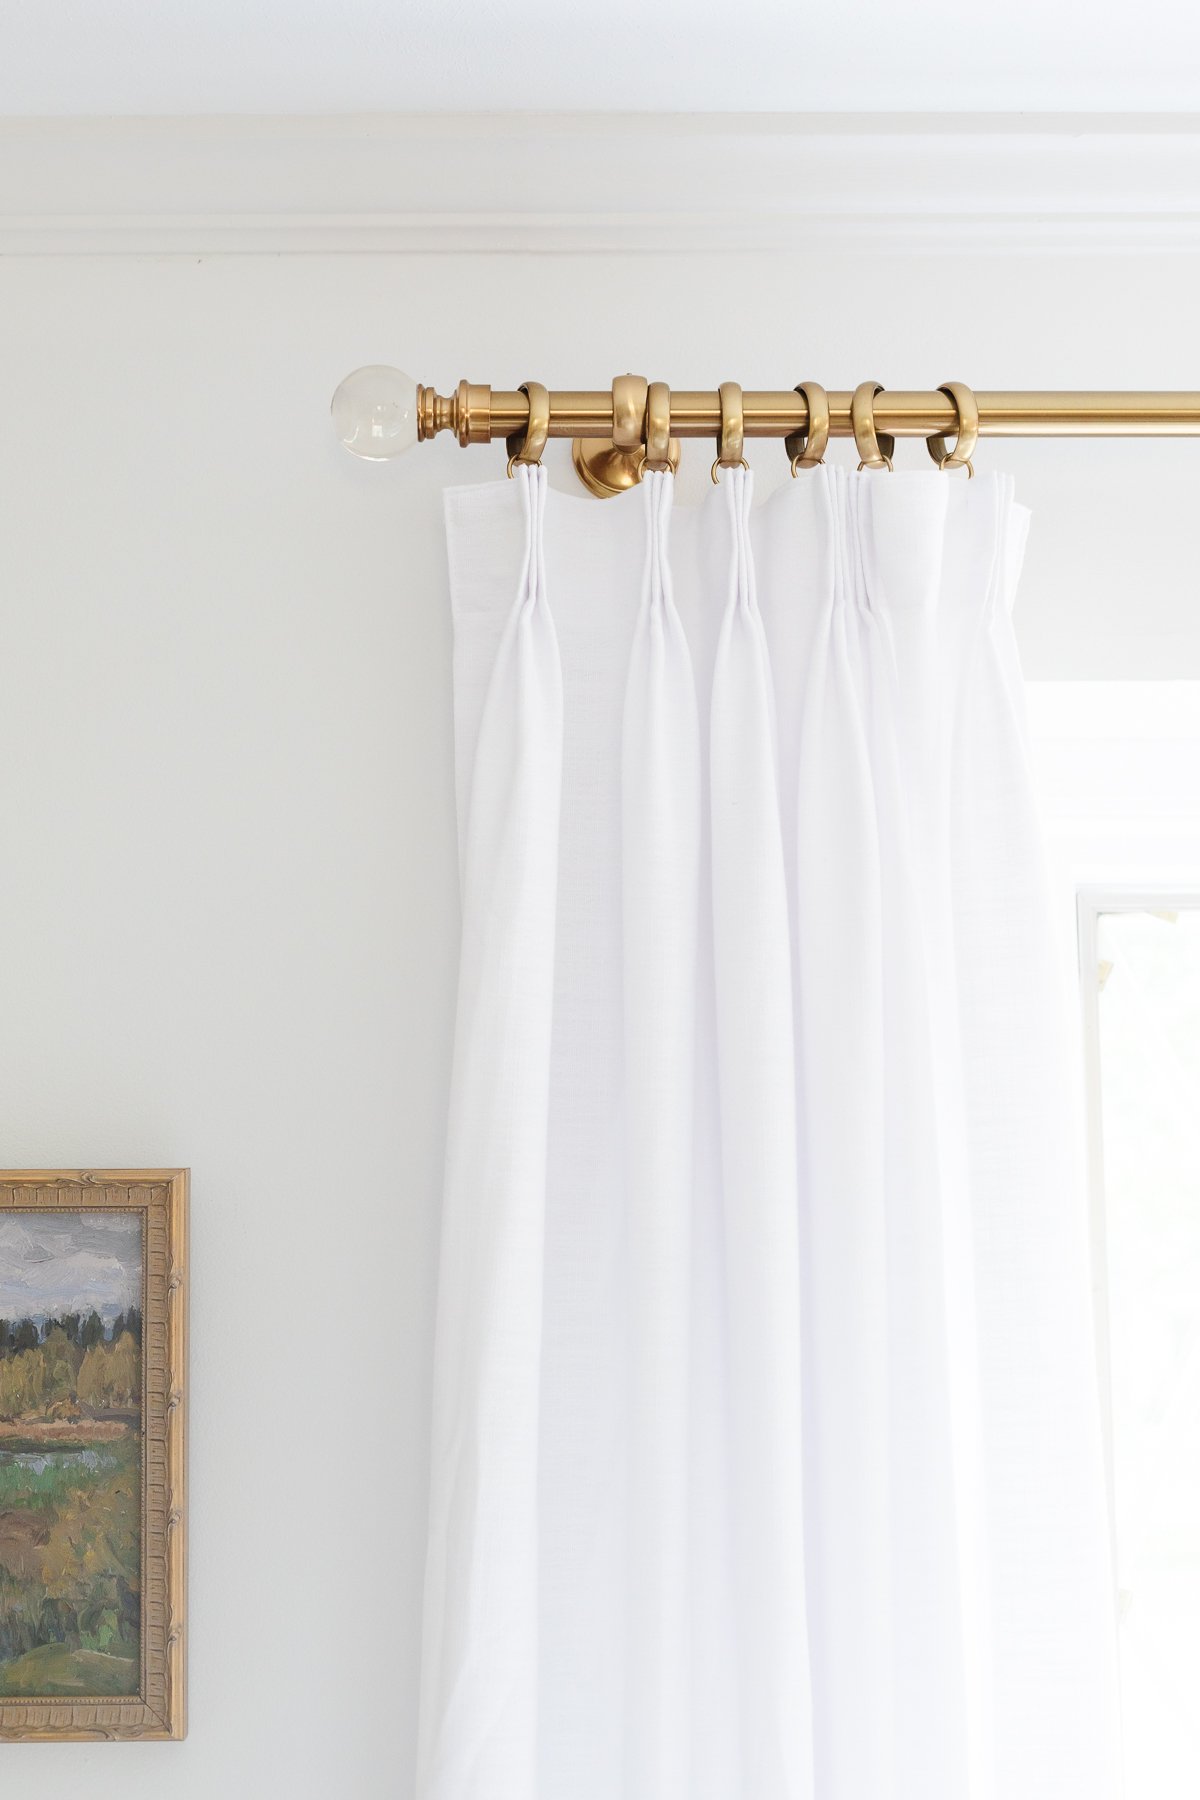 A brass curtain rod with white triple pinch pleat drapes in a living room.